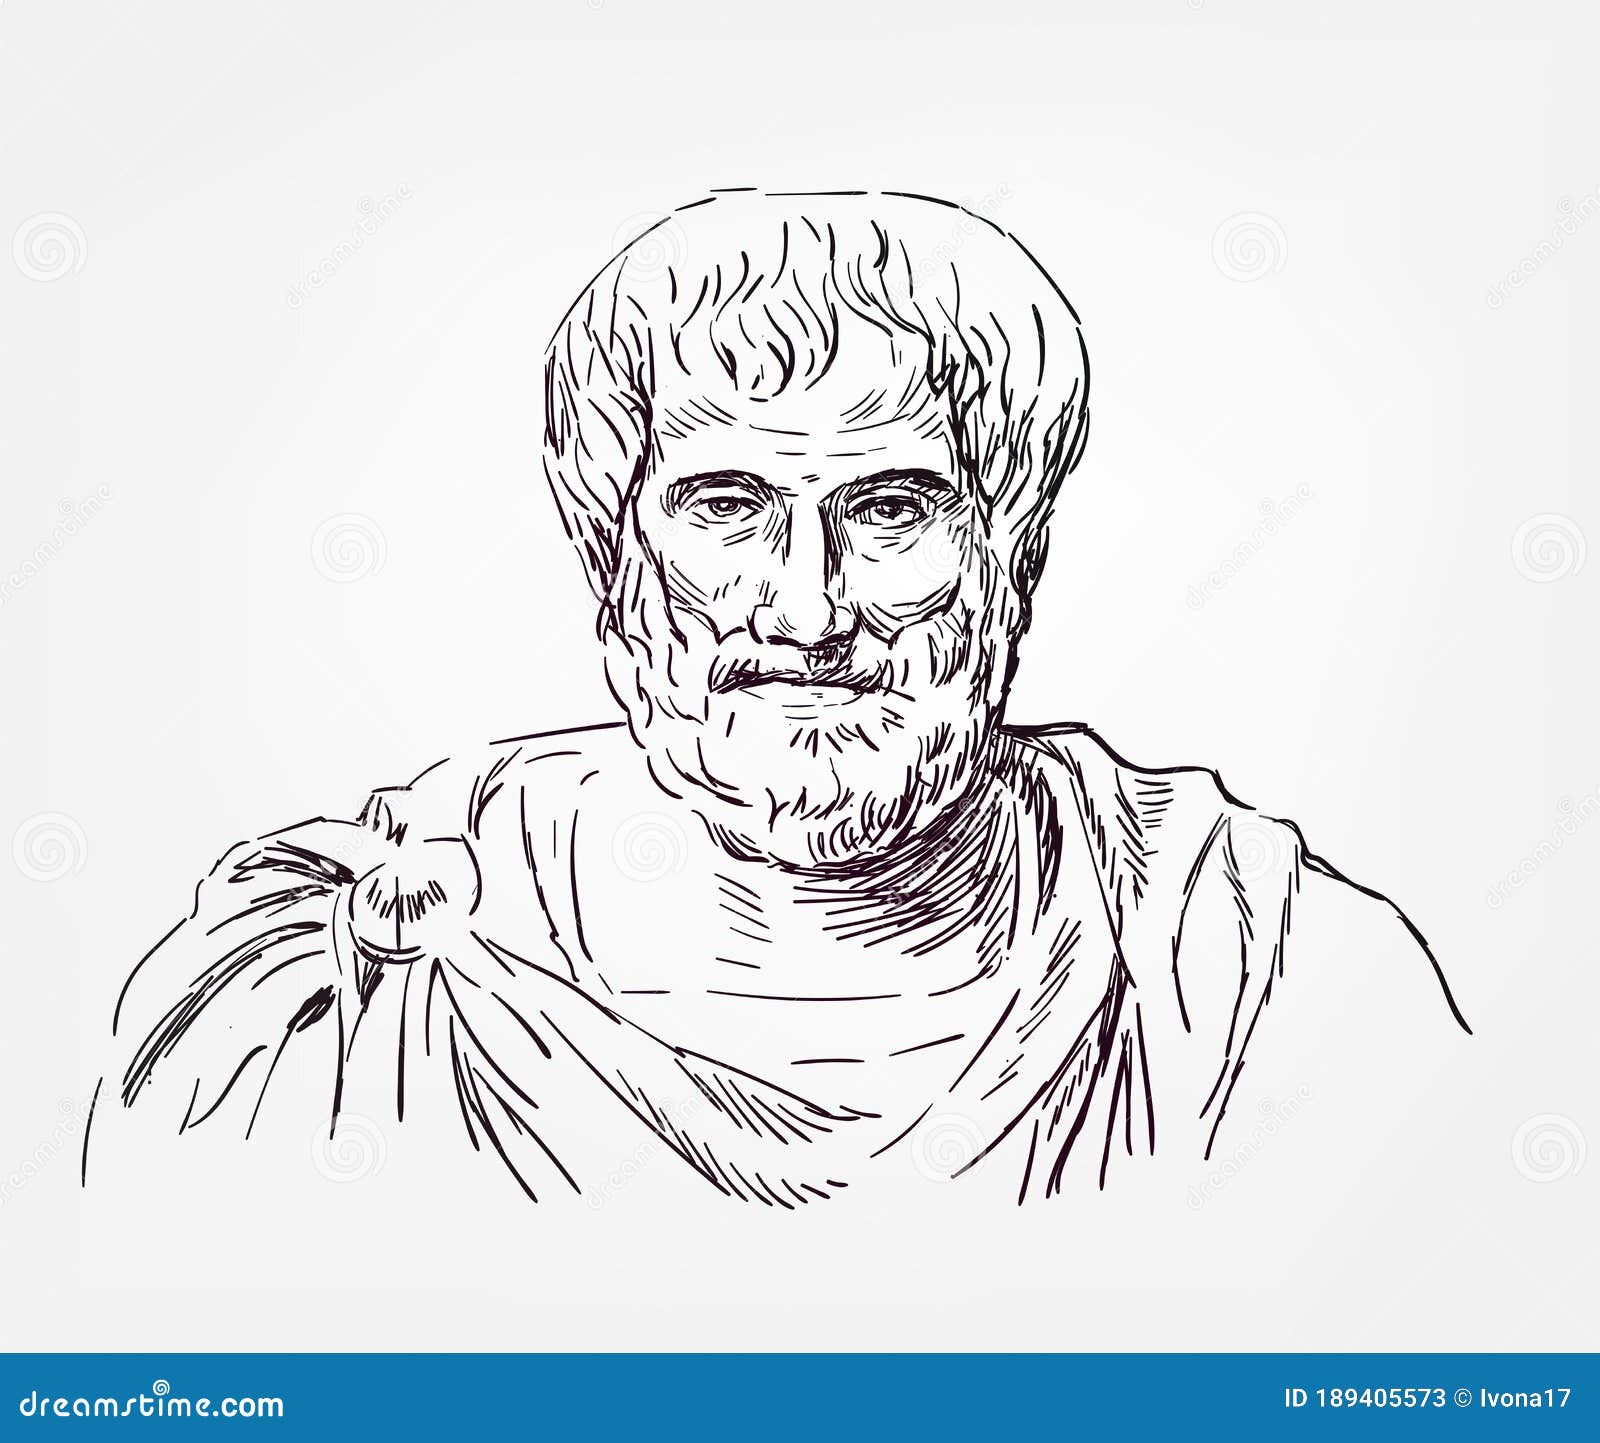 Aristotle Cartoons, Illustrations & Vector Stock Images - 469 Pictures ...